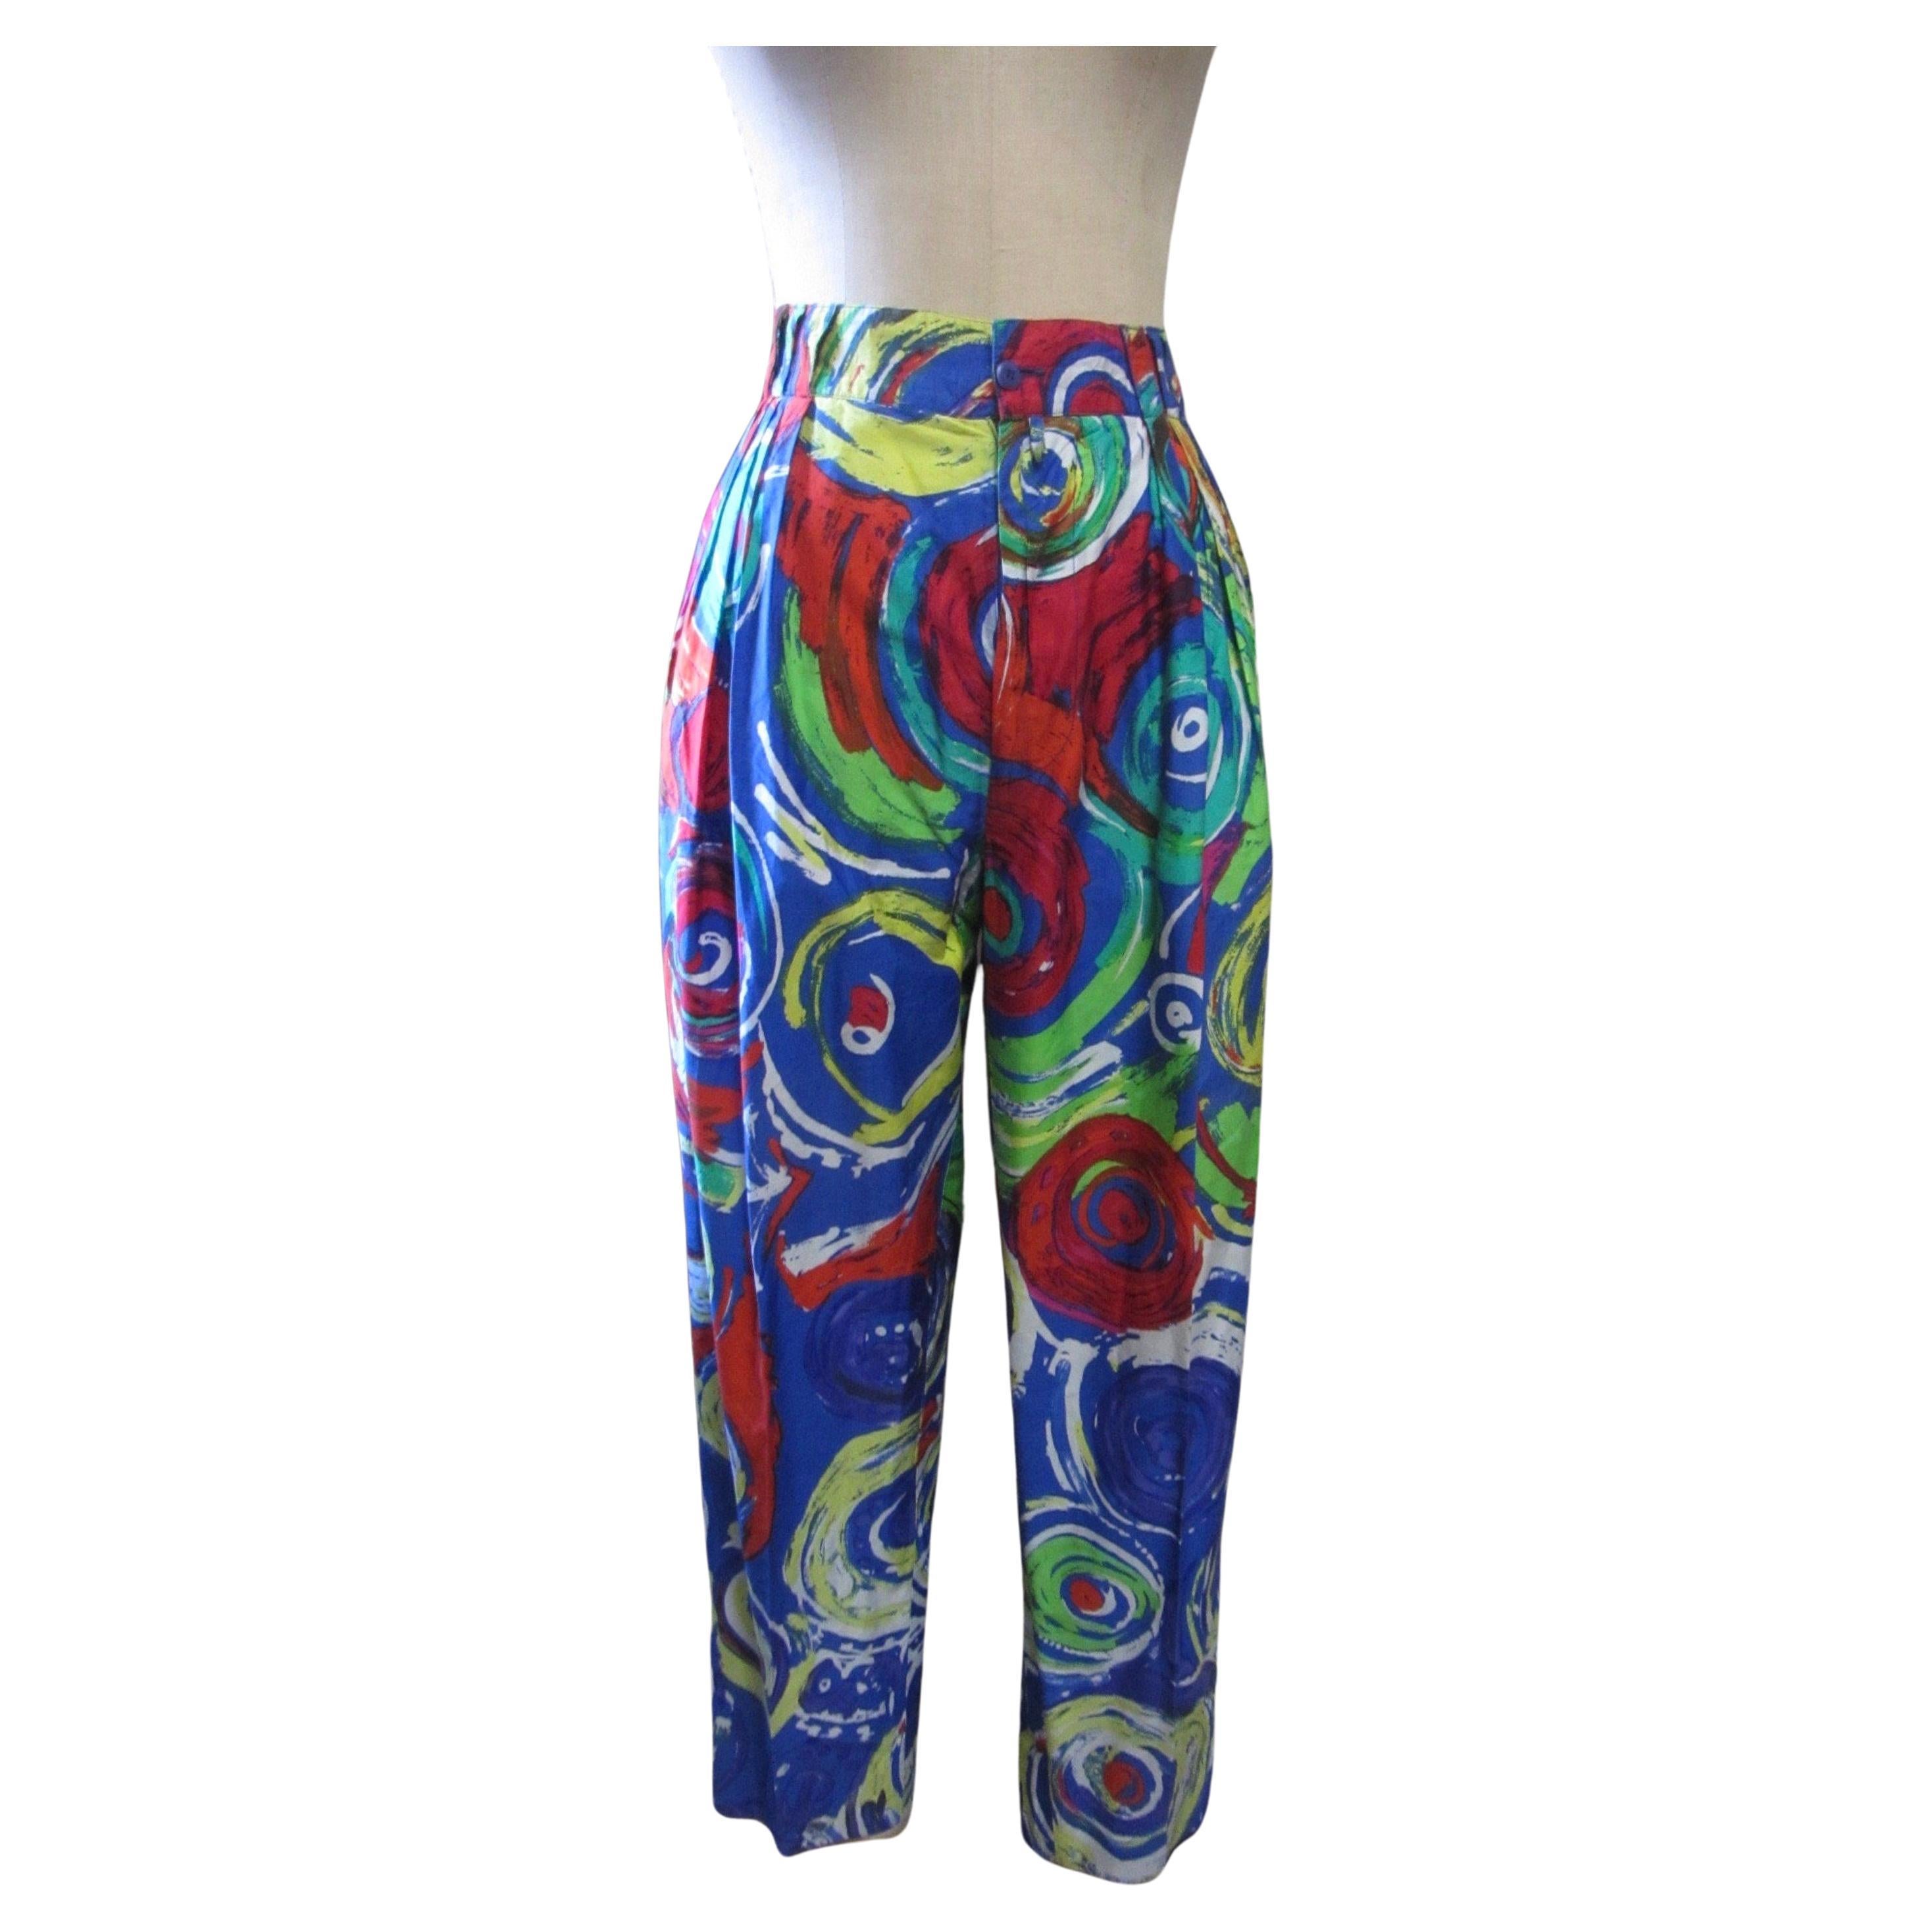 Gianni Versace Colorful Abstract Print Trousers, Circa 1991 For Sale